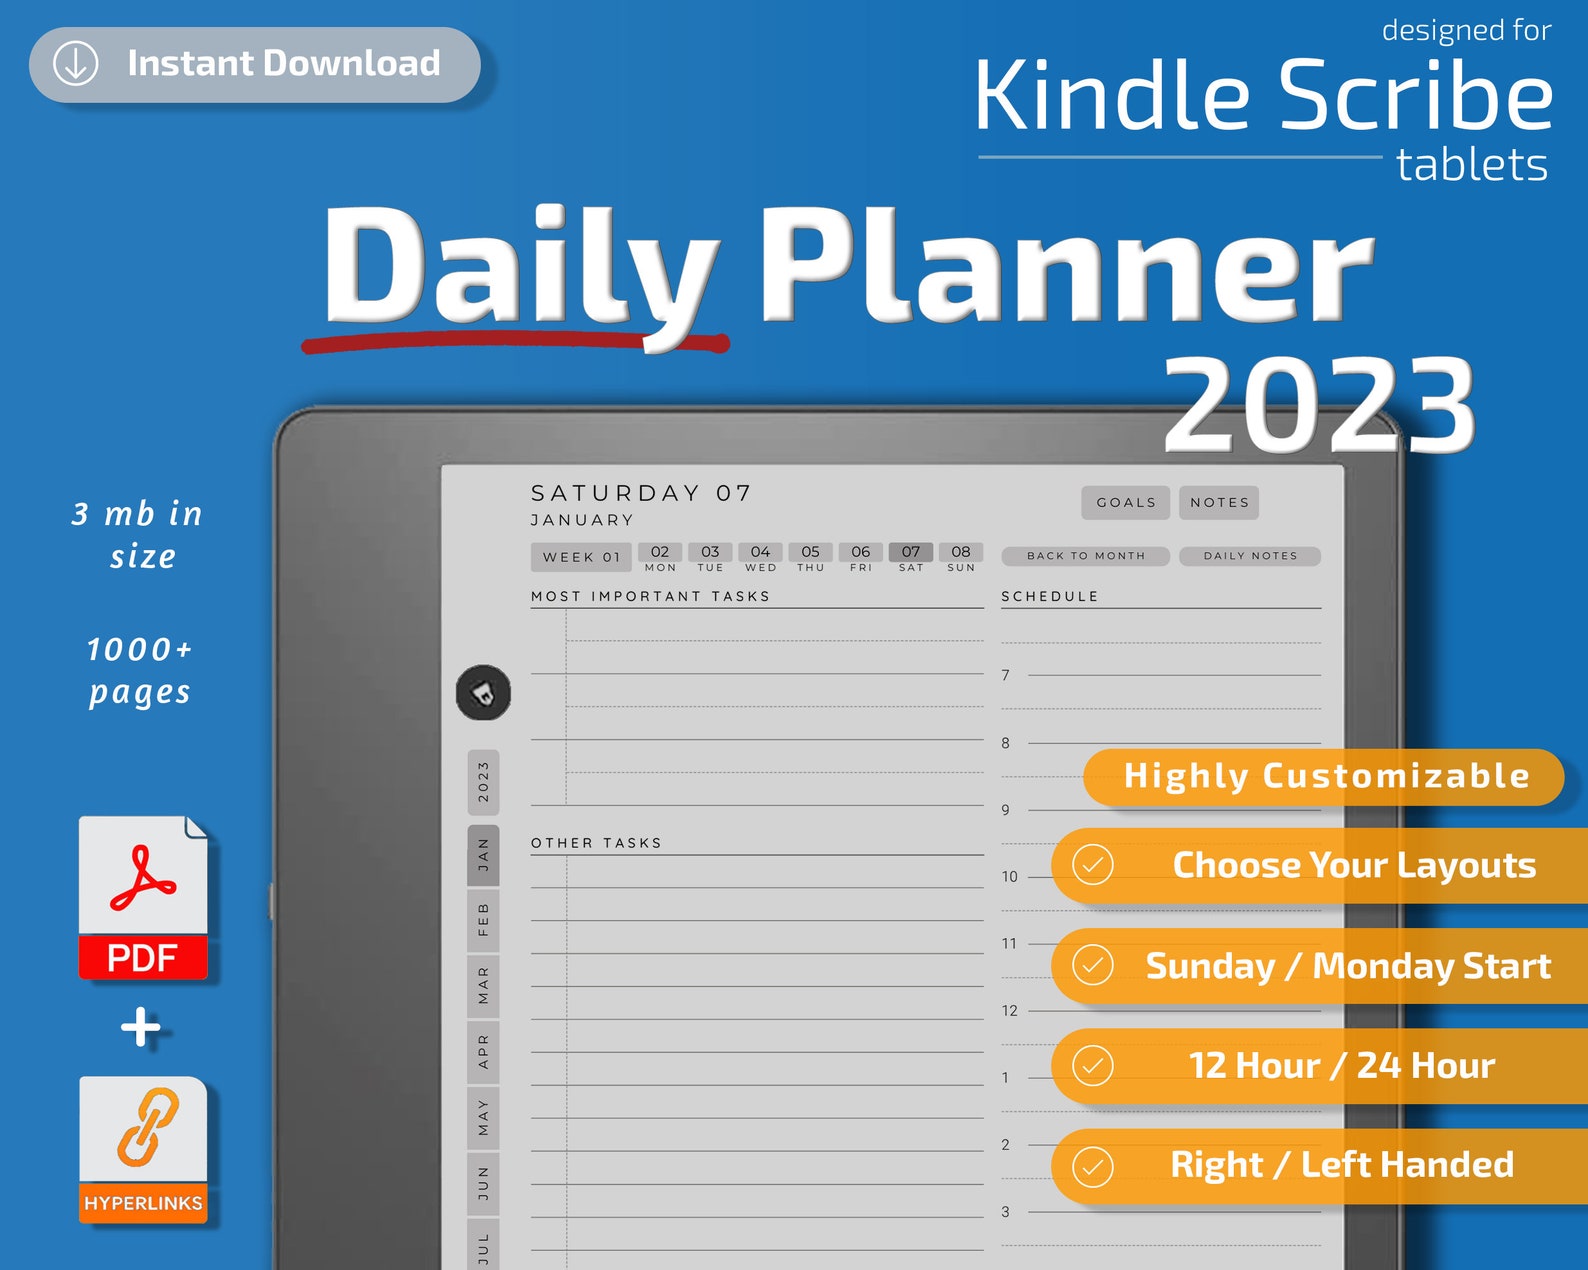 kindle-scribe-daily-planner-2023-kindle-scribe-templates-etsy-canada